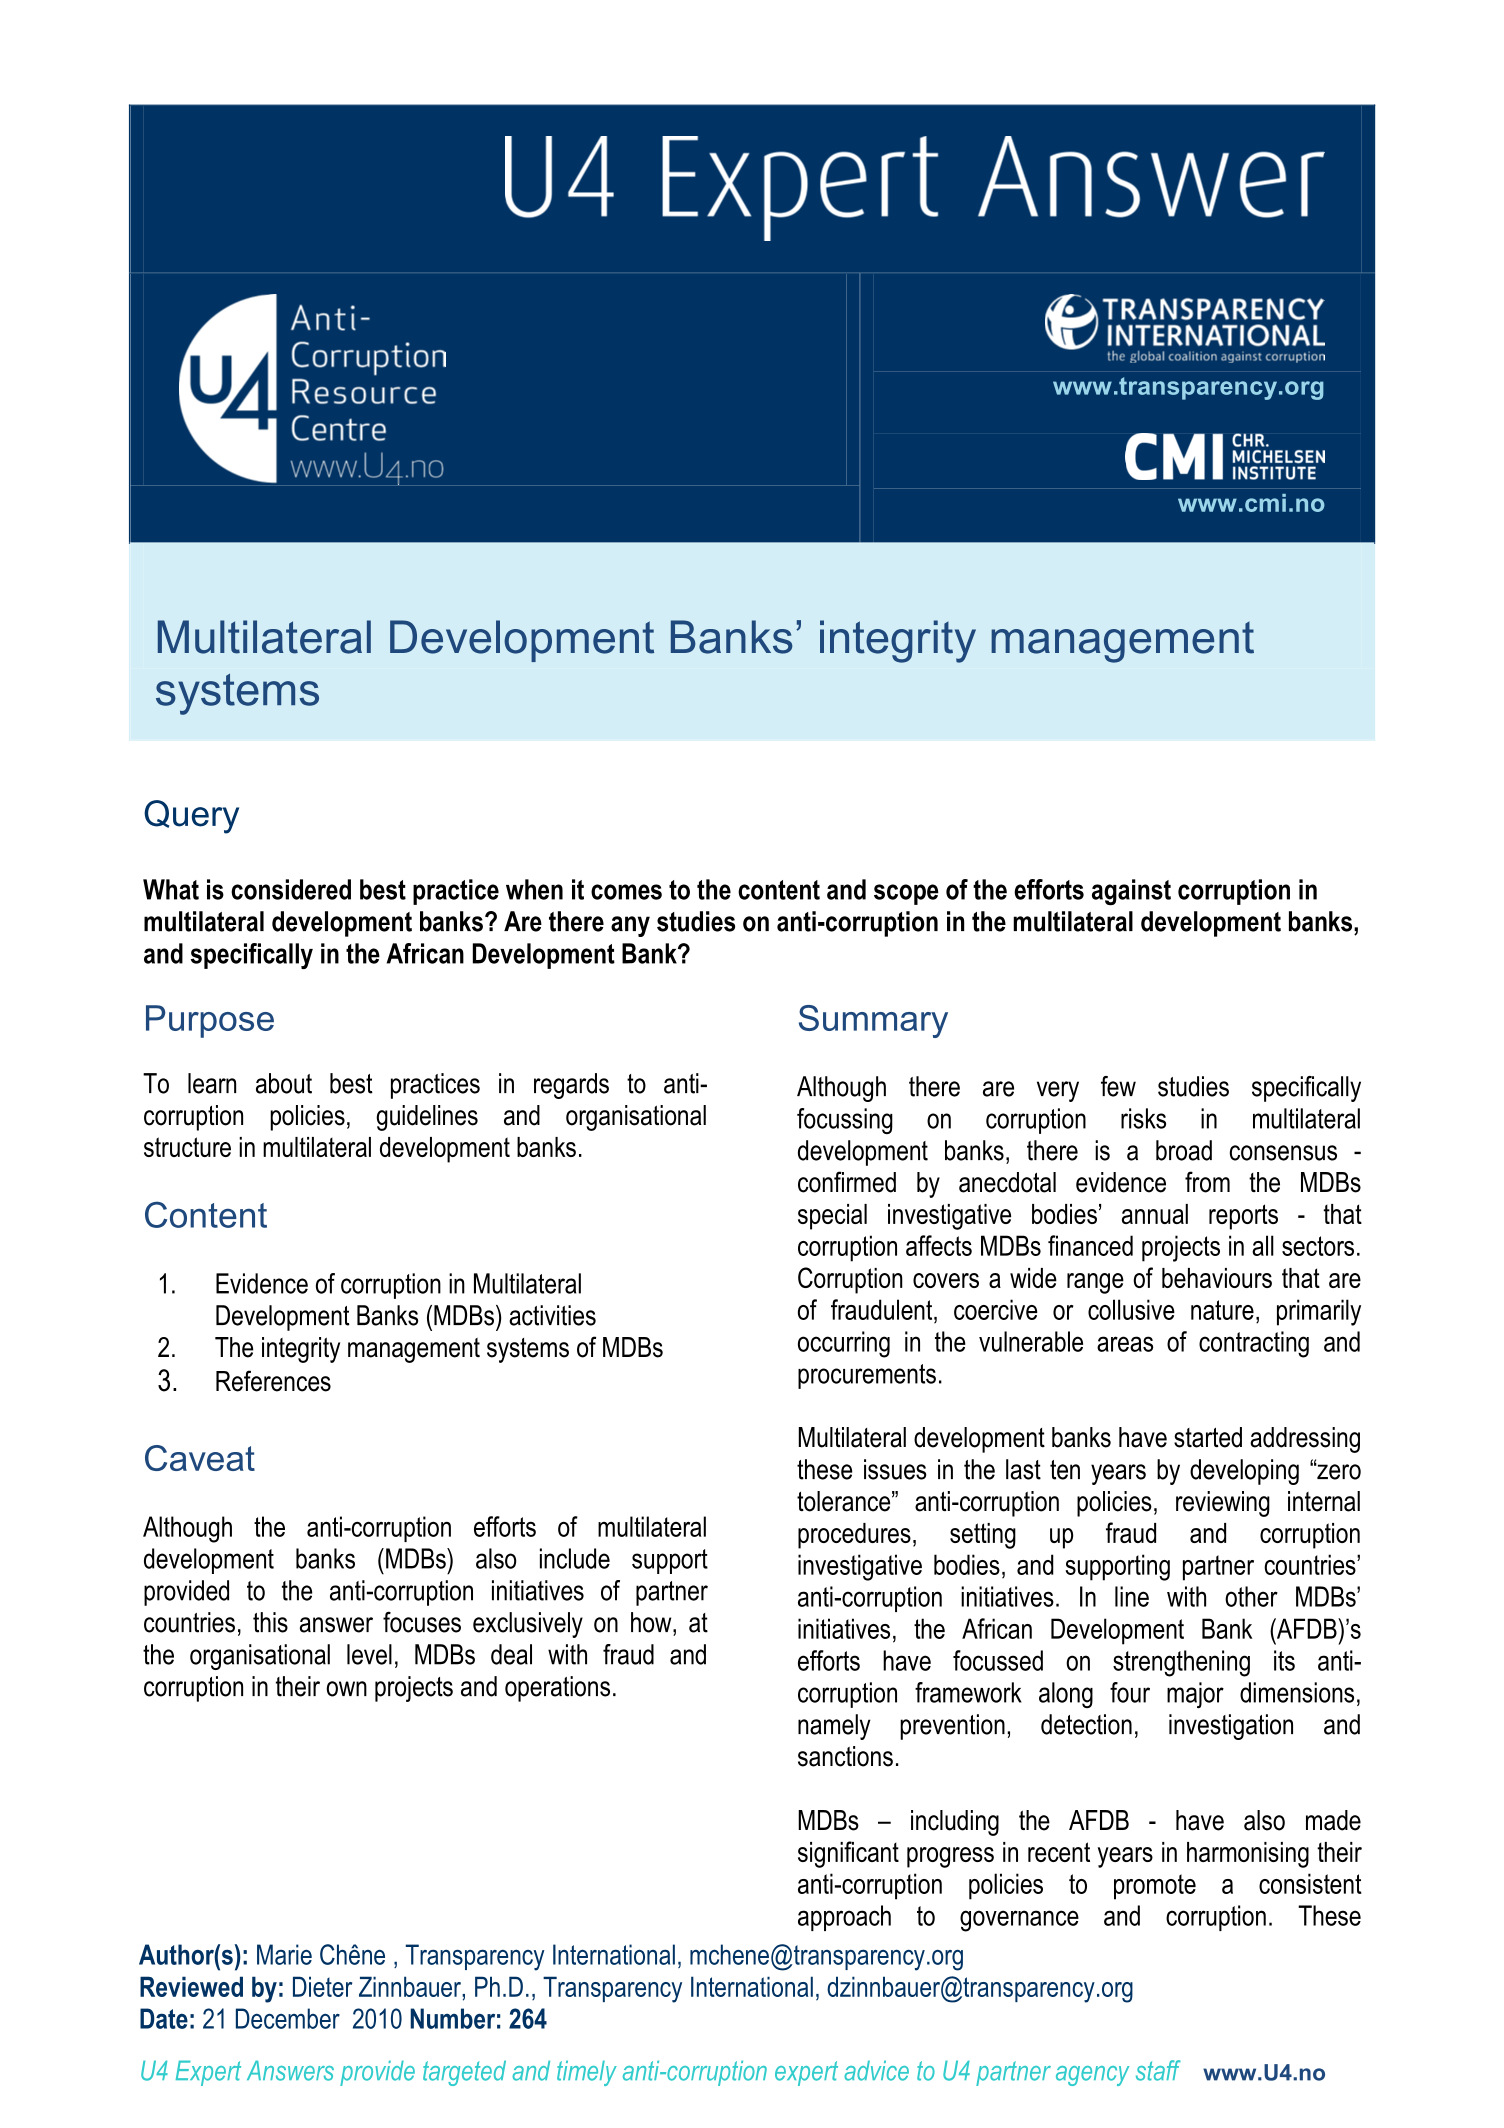 Multilateral Development Banks’ integrity management systems